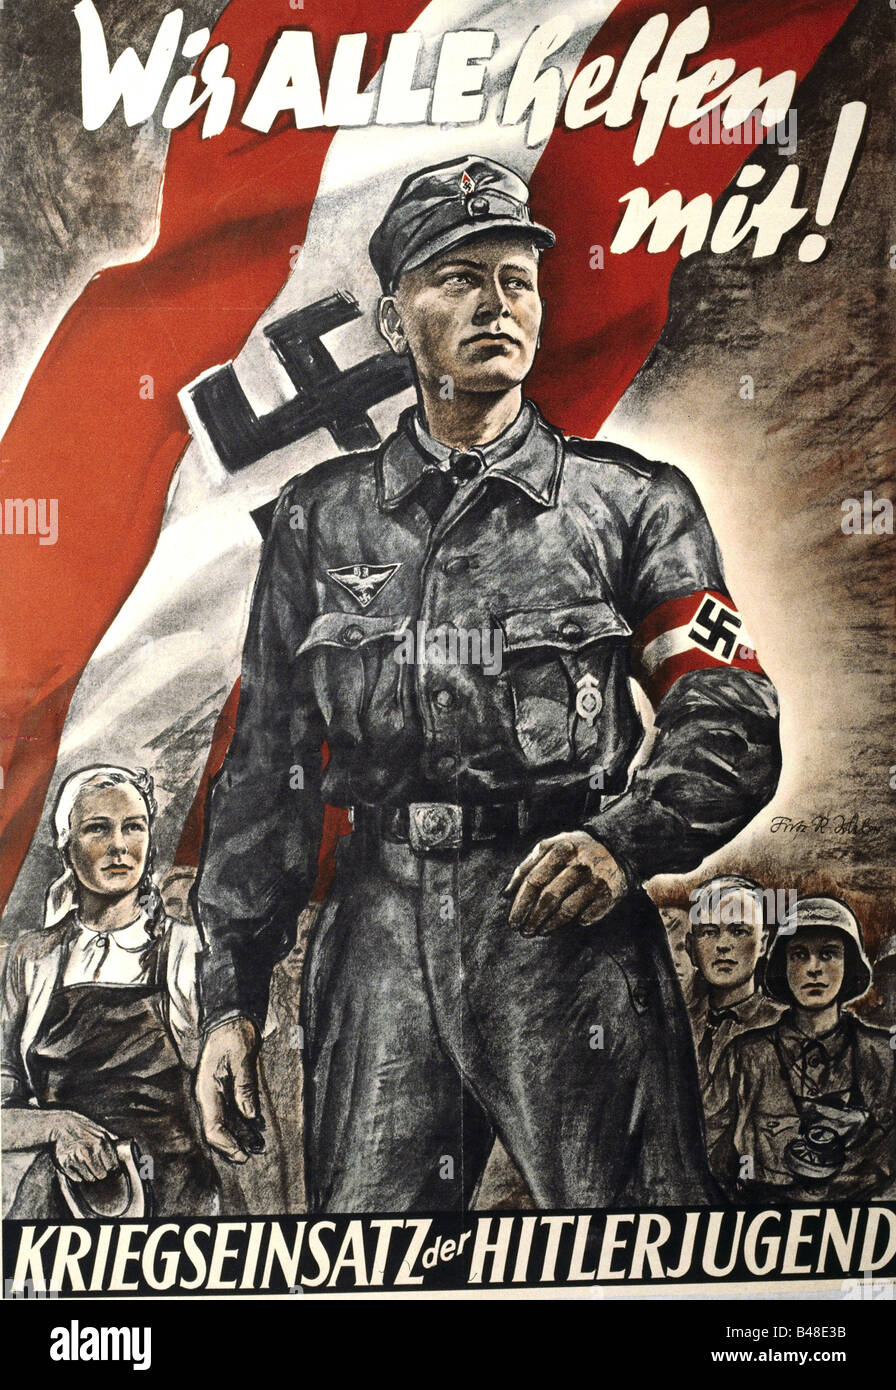 Nazism / National Socialism, organisations, Hitler Youth, poster, war service for Hitler Youth, 1943,  Nazi Germany, Third Reich, 20th century, propaganda, Hilterjugend, military, , Stock Photo